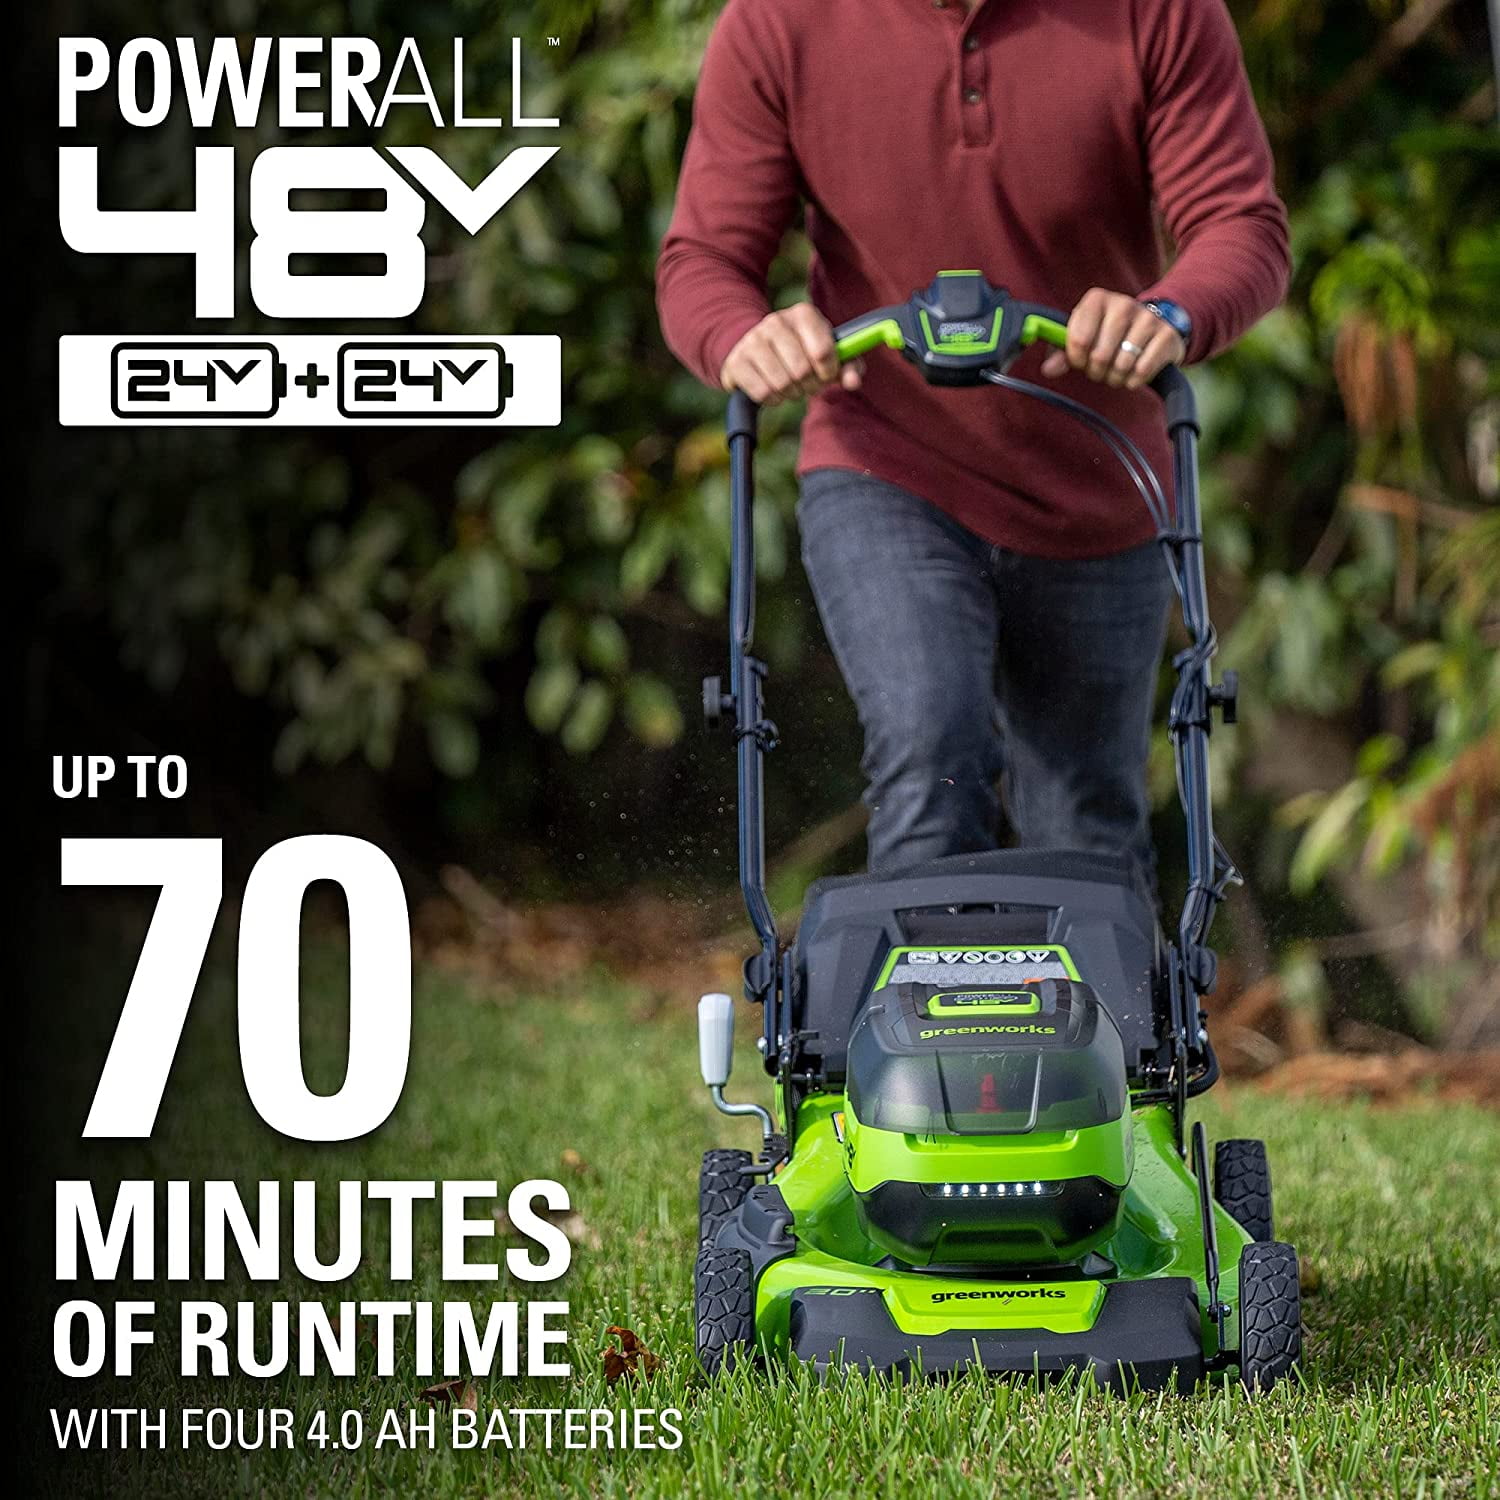 4.0Ah USB Batteries and Dual Port Rapid Charger Included 8 Brushless Cordless Edger, 2 Greenworks 2 x 24V 48V 